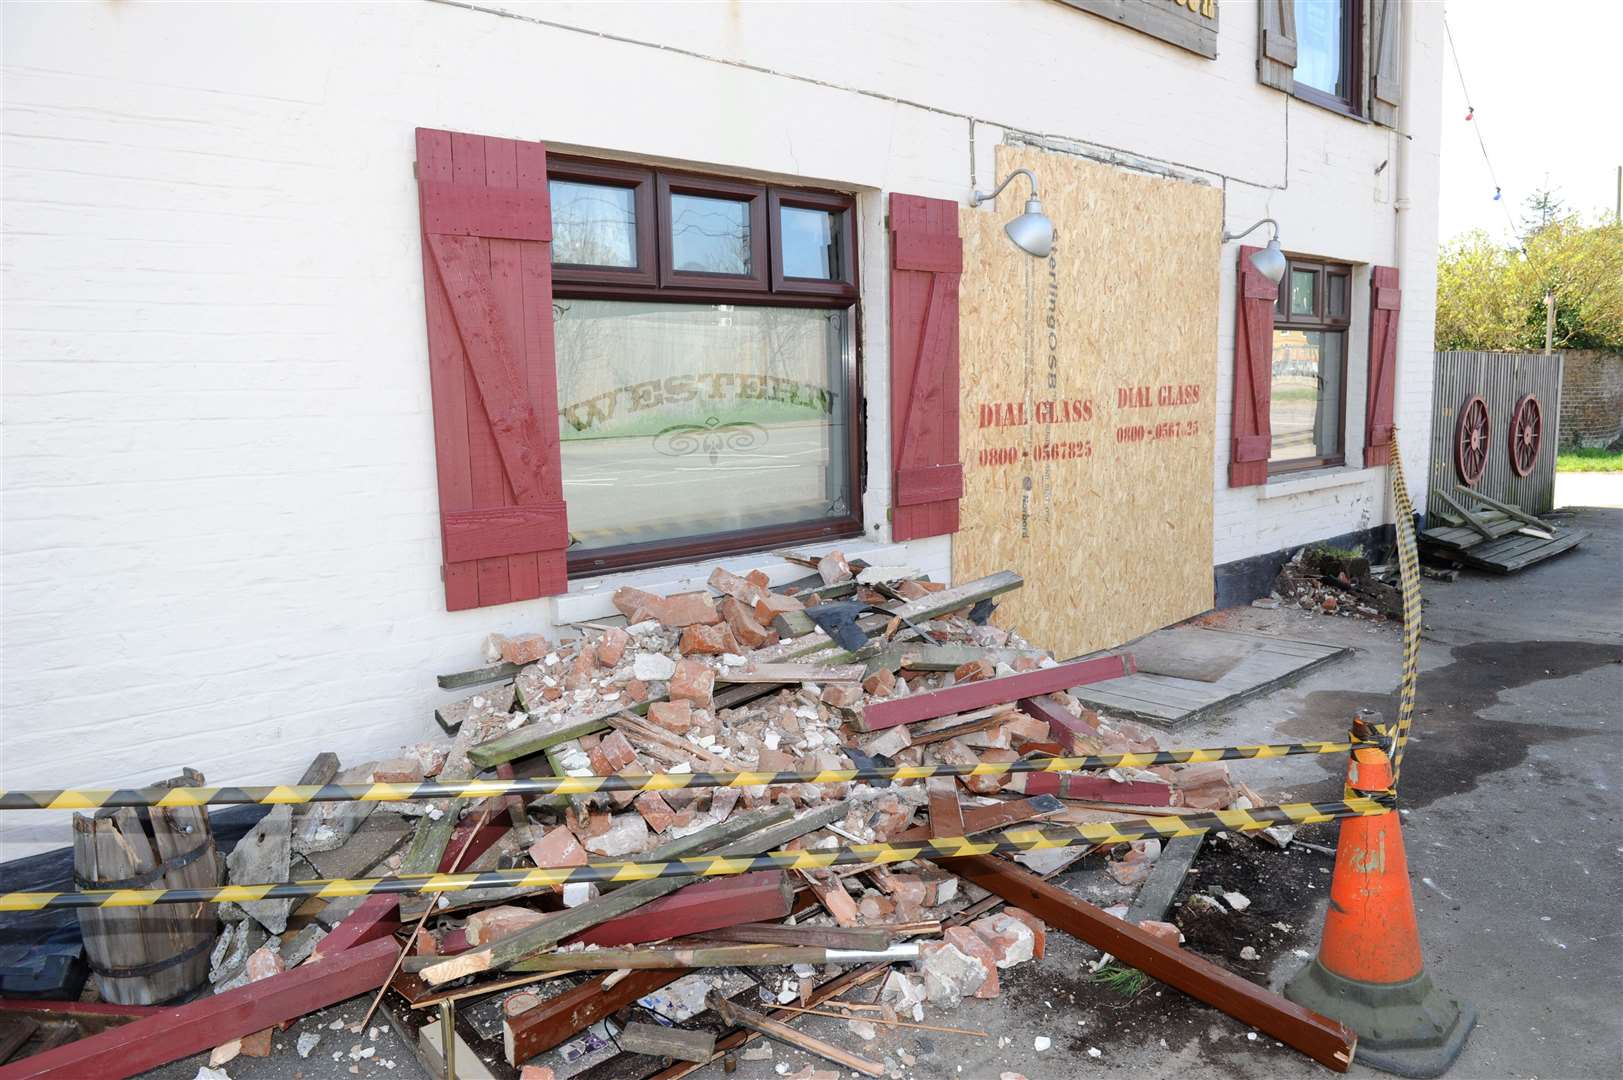 The pub was damaged after a car ploughed into it in 2015